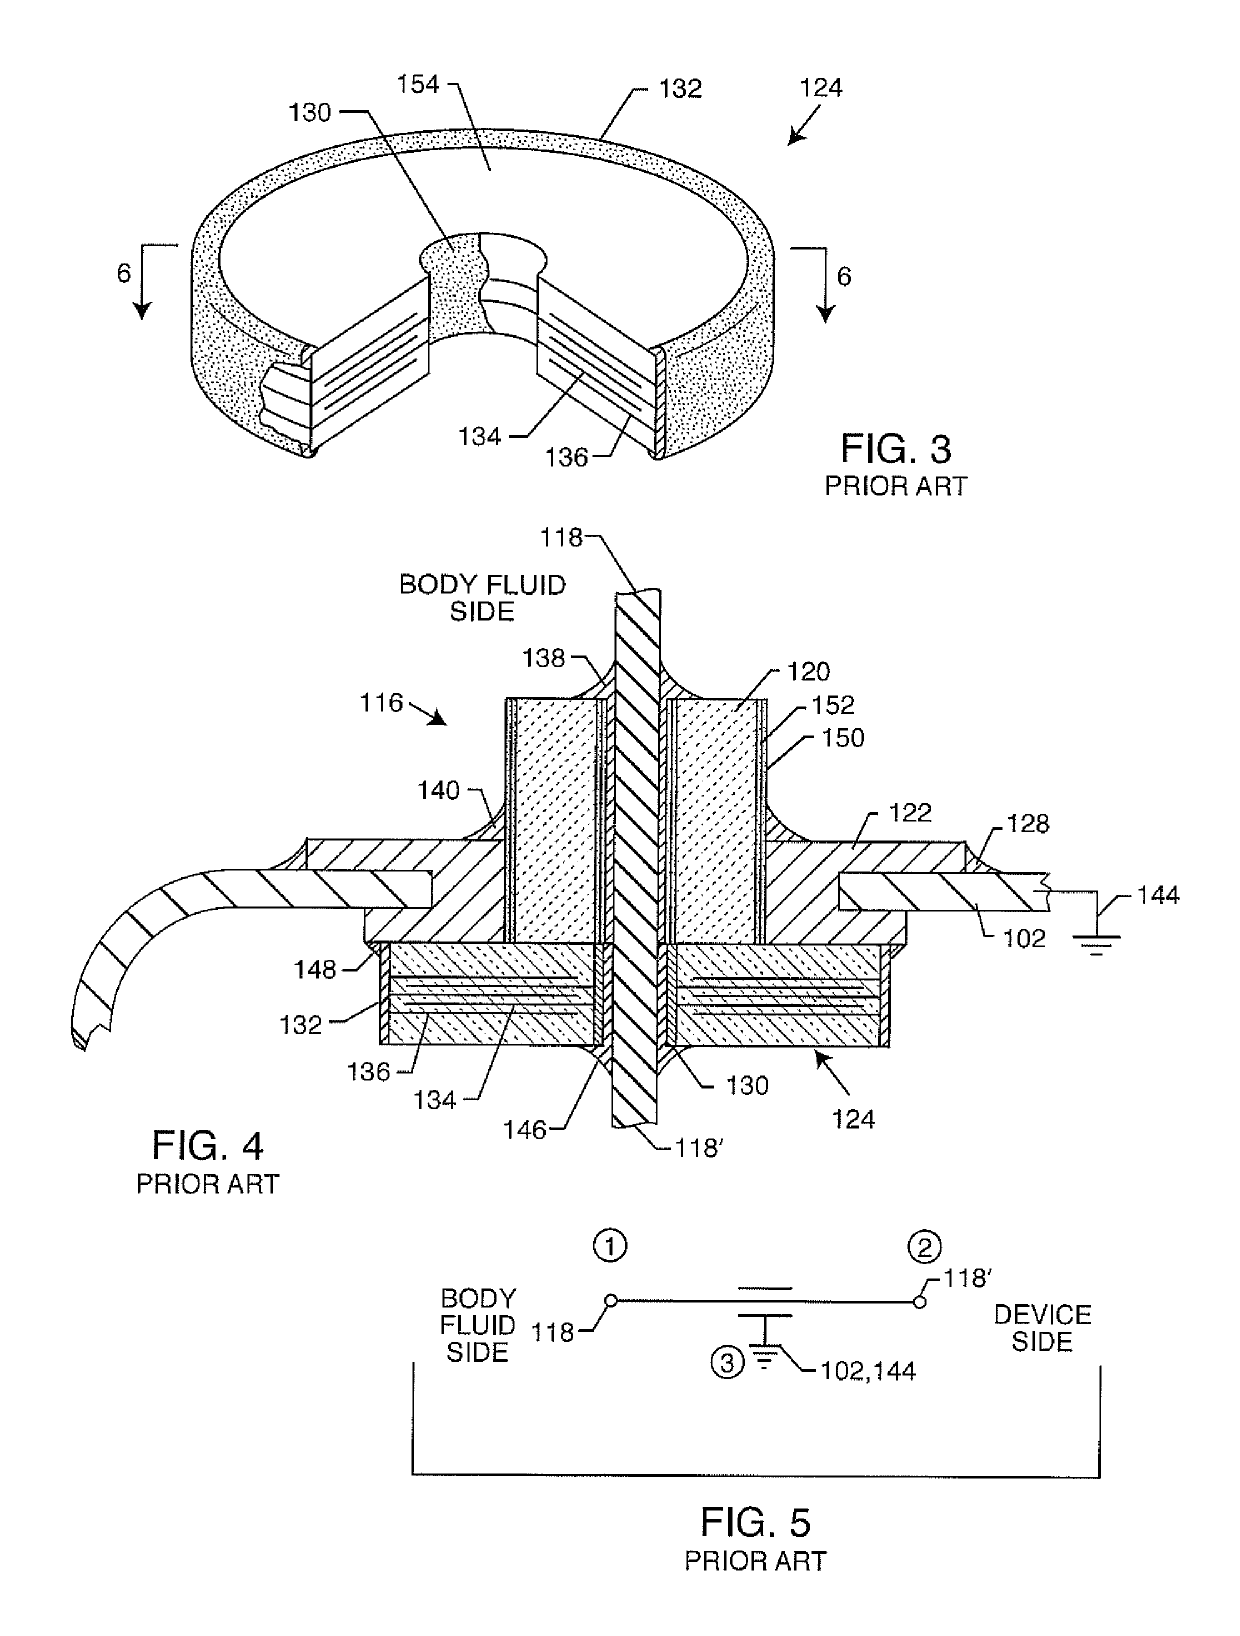 Process for manufacturing a leadless feedthrough for an active implantable medical device